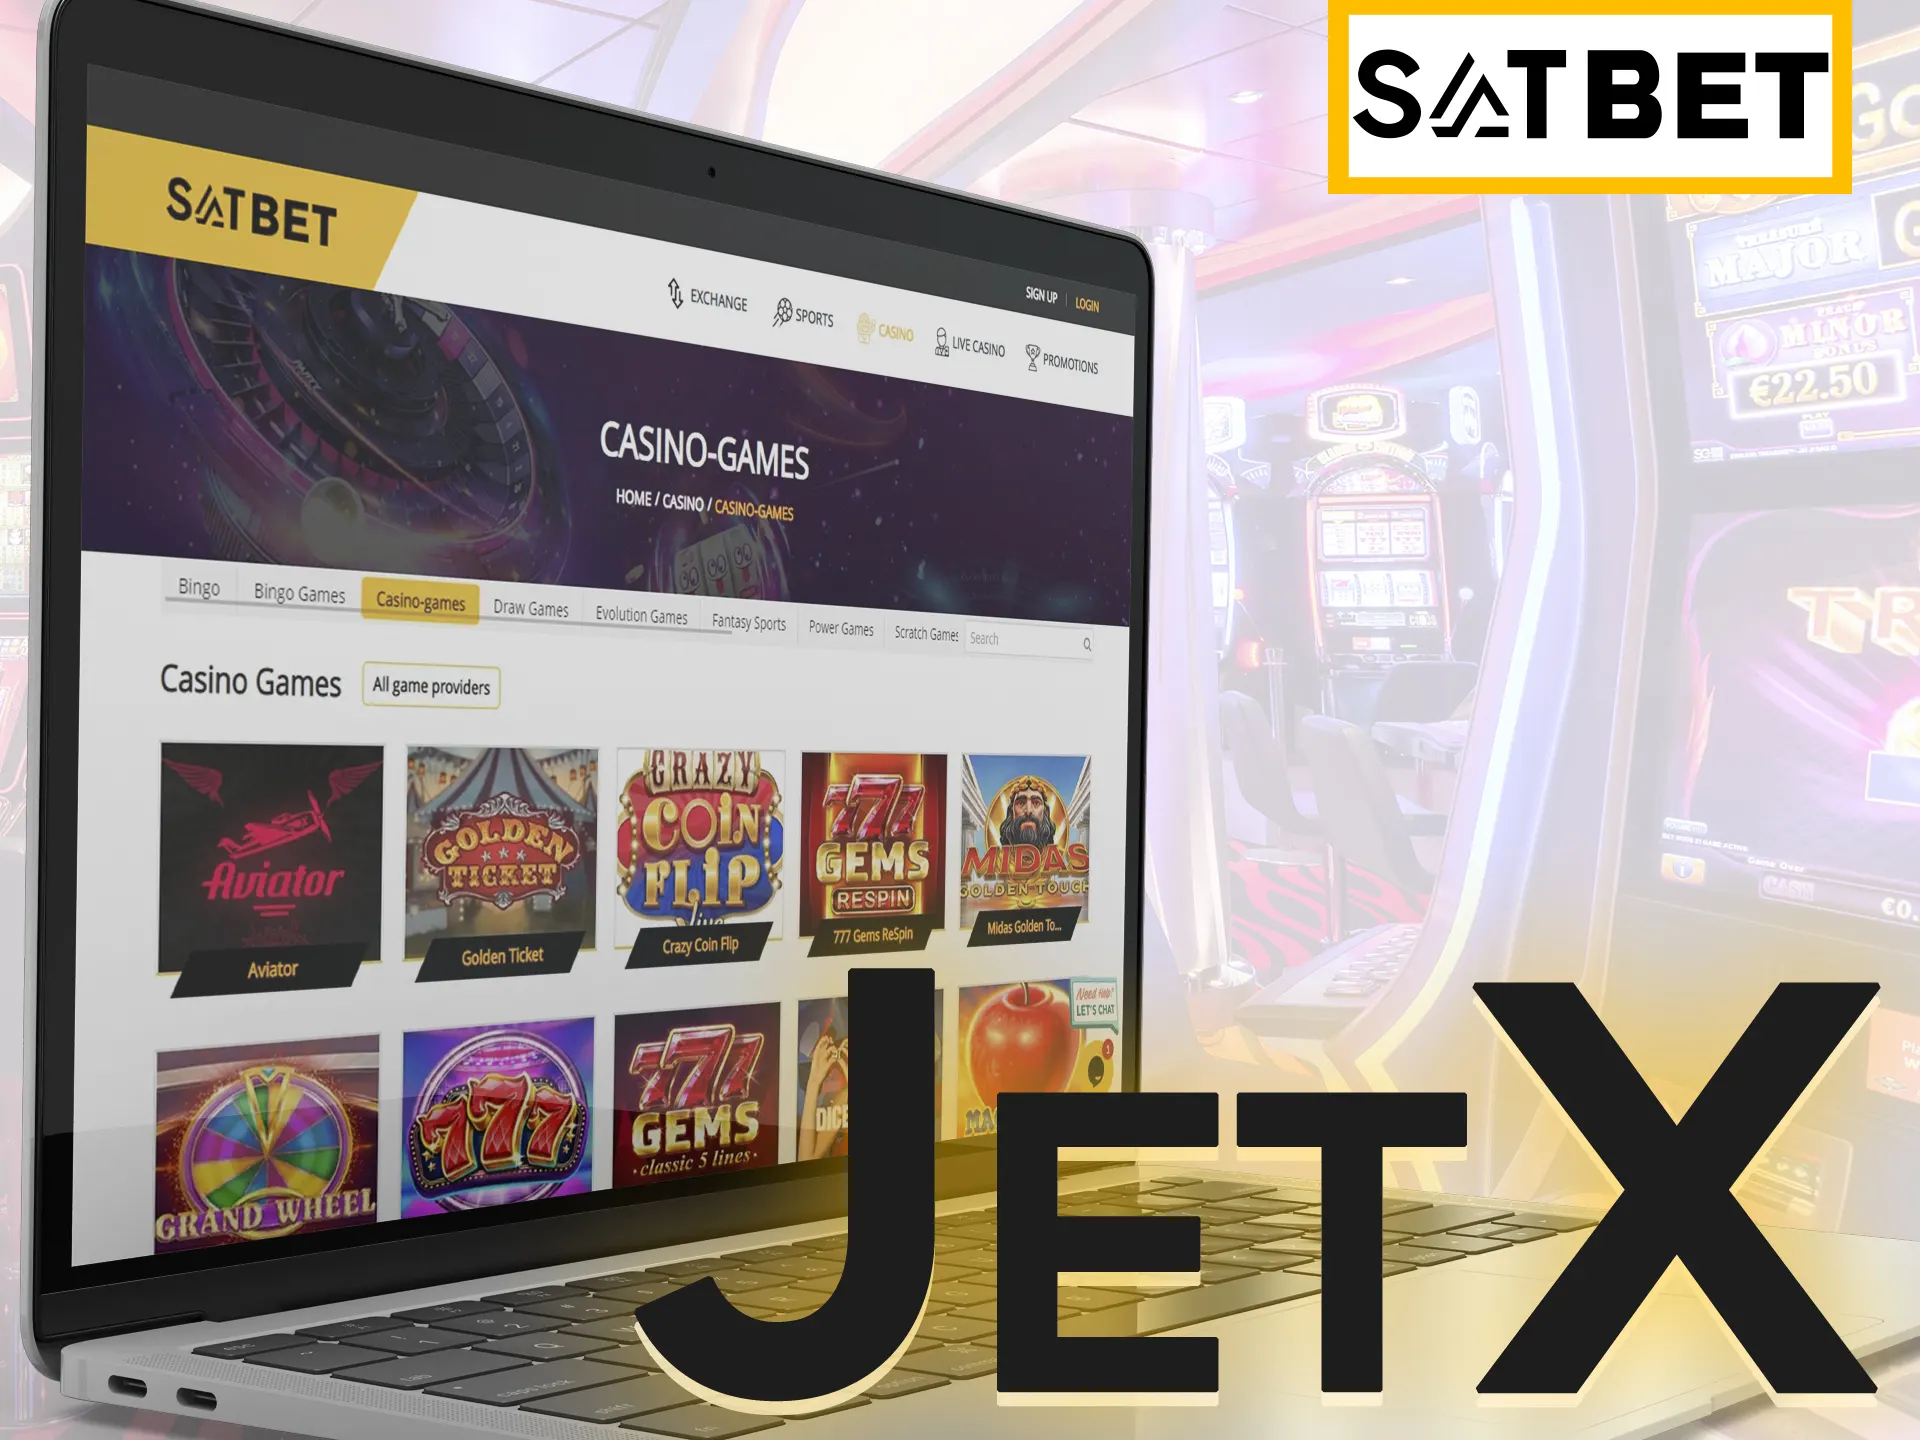 Bet on rocket and wait for result at Satbet JetX game.